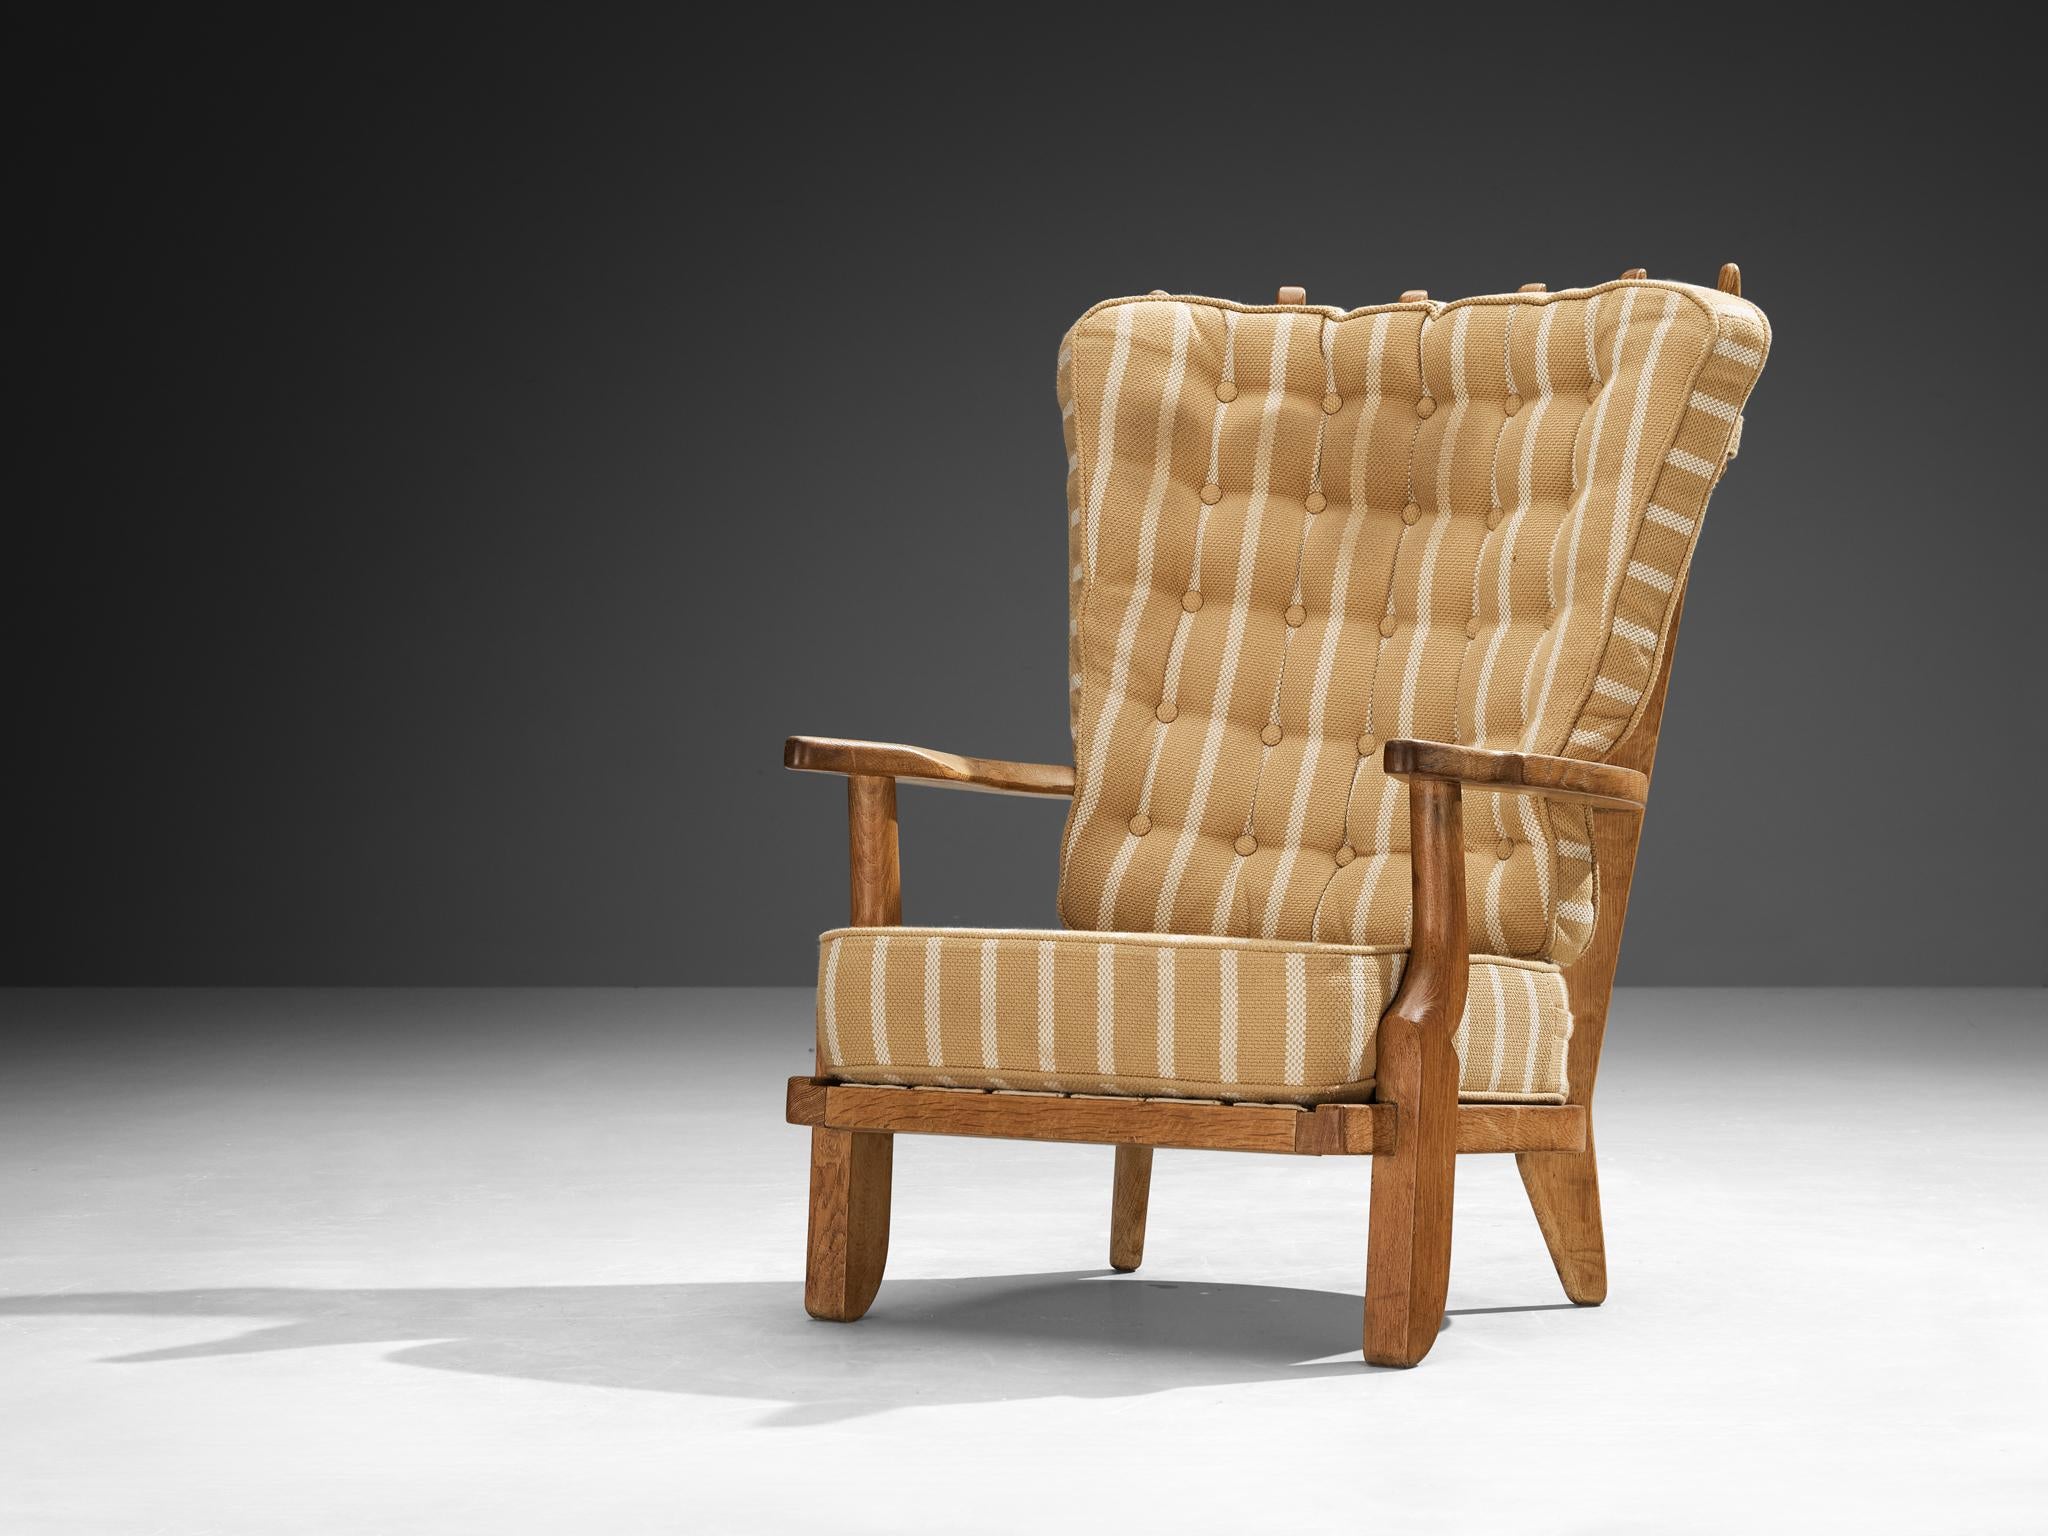 Guillerme & Chambron 'Grand Repos' Lounge Chair in Striped Beige Upholstery